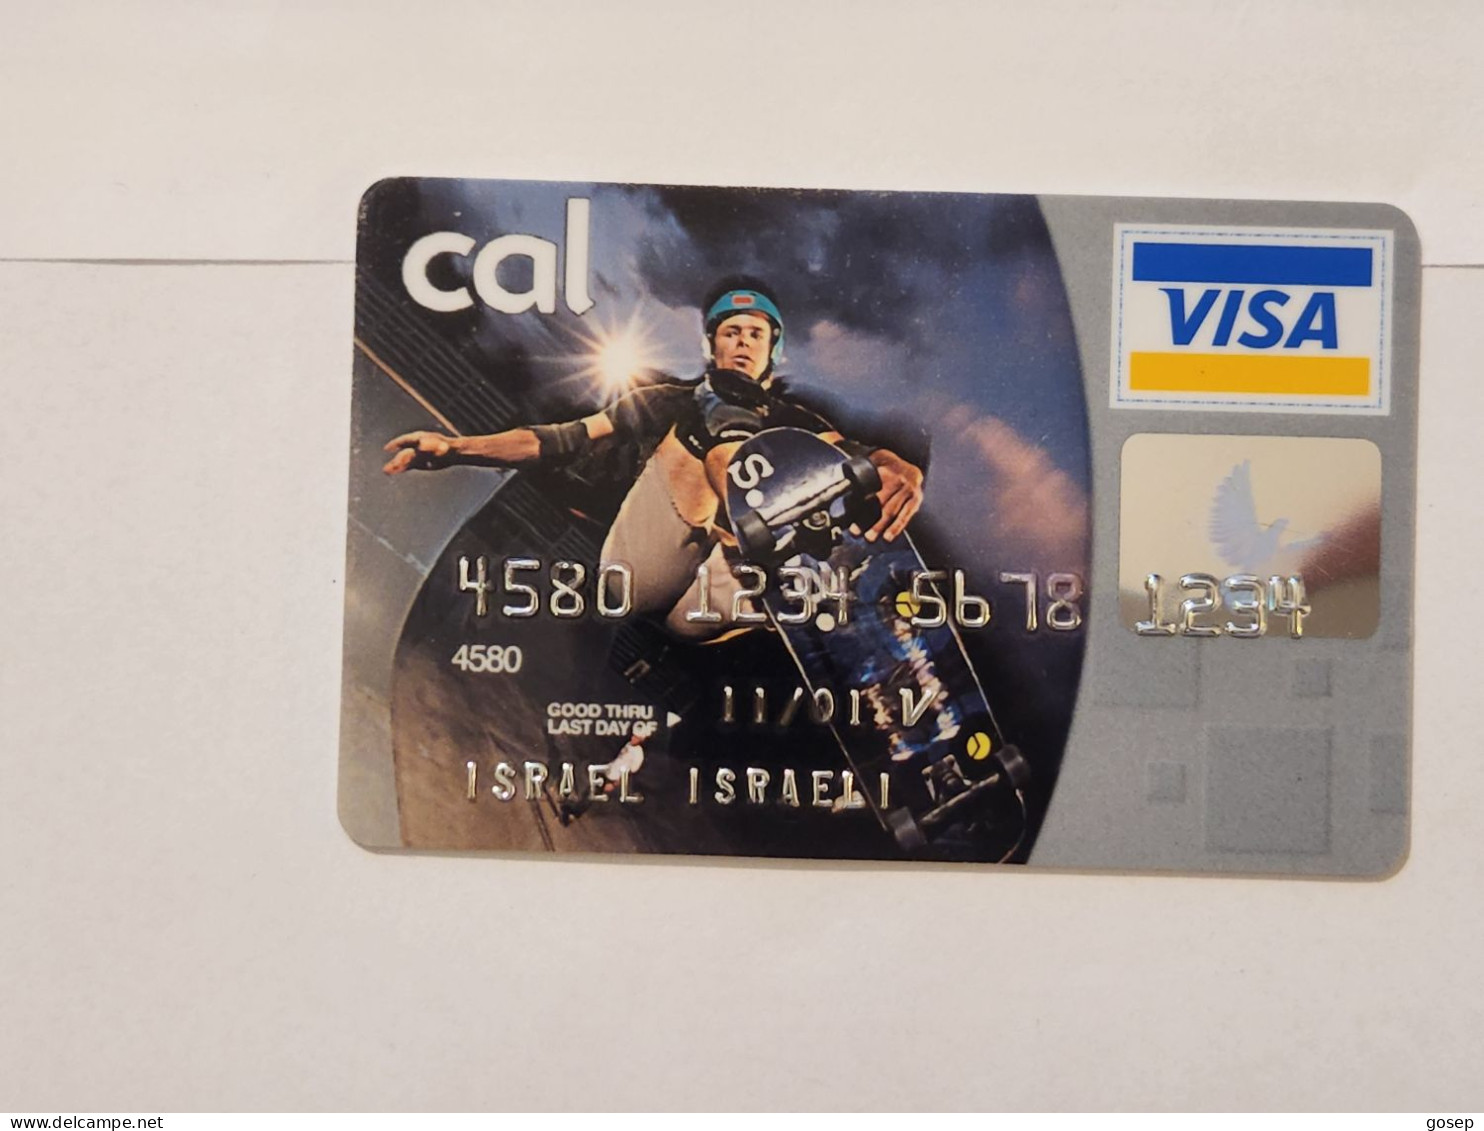 ISRAEL-CALL VISA ELECTRON-(4580-1234-5678-1234)(A Special Rare Experimental Card)-(C)-(01.11.01)-Good Card - Credit Cards (Exp. Date Min. 10 Years)